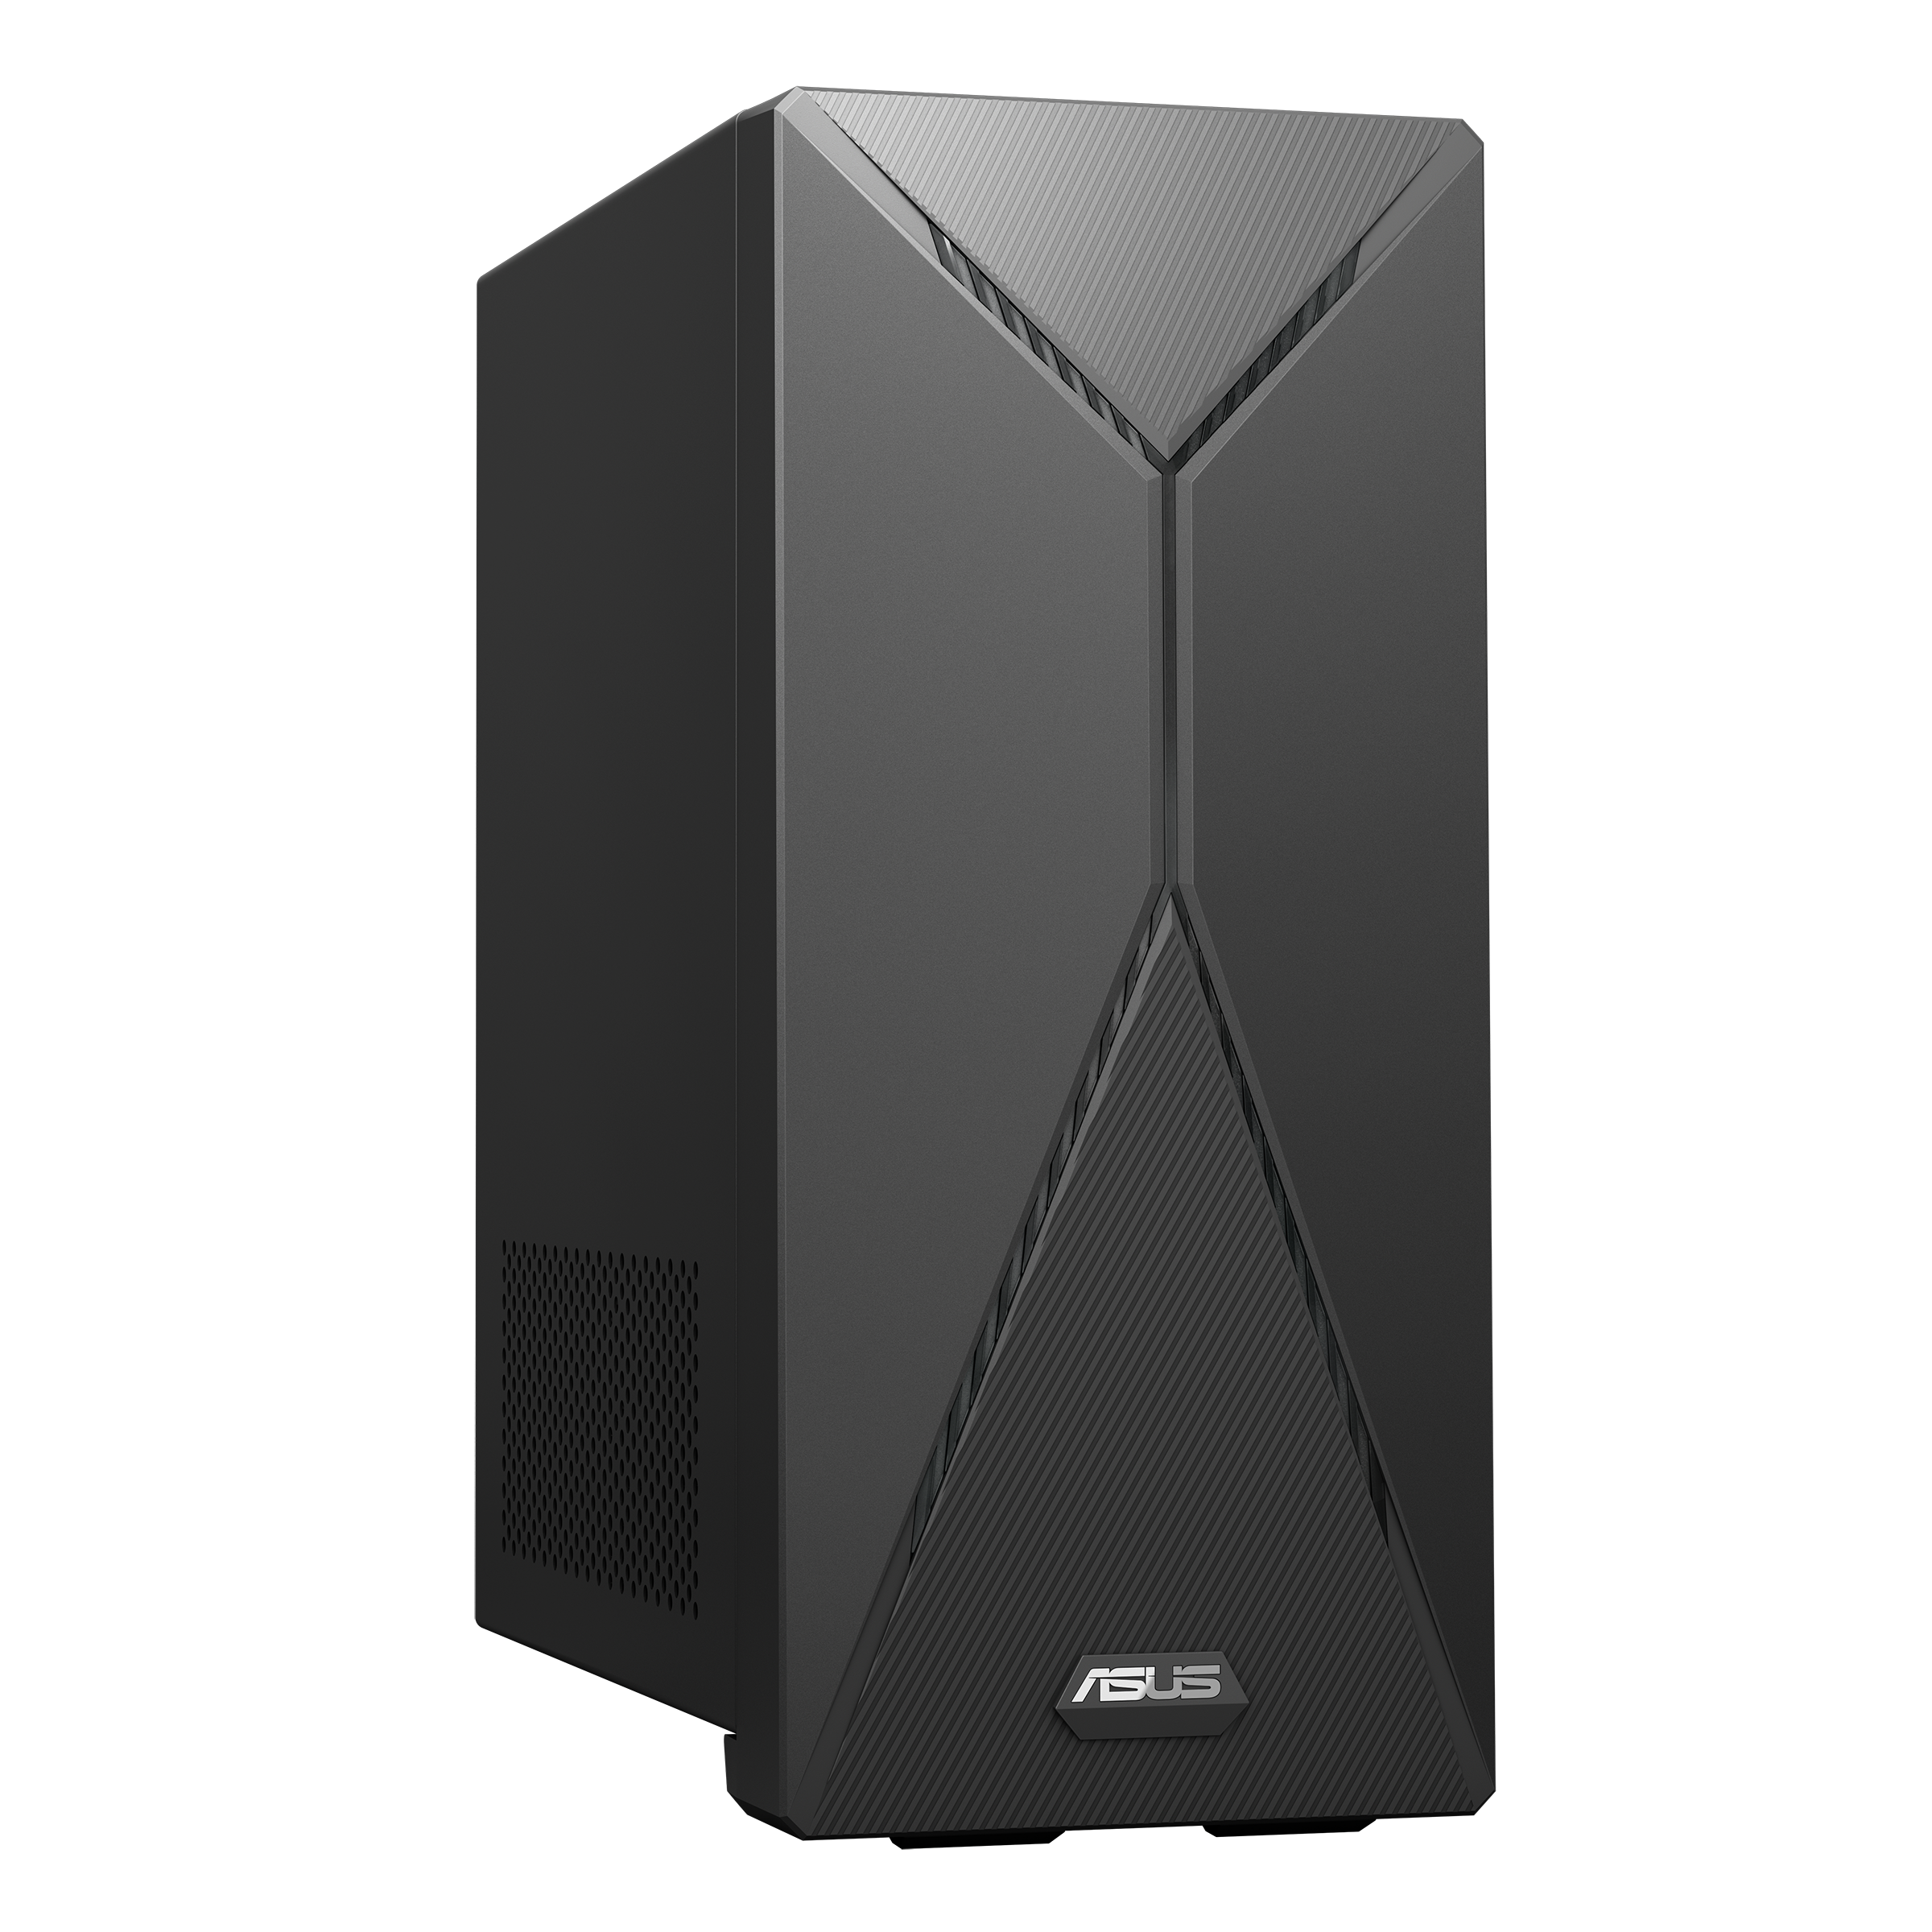 A right 45-degree-angled product shot of ASUS S5 Mini Tower (S501MER)